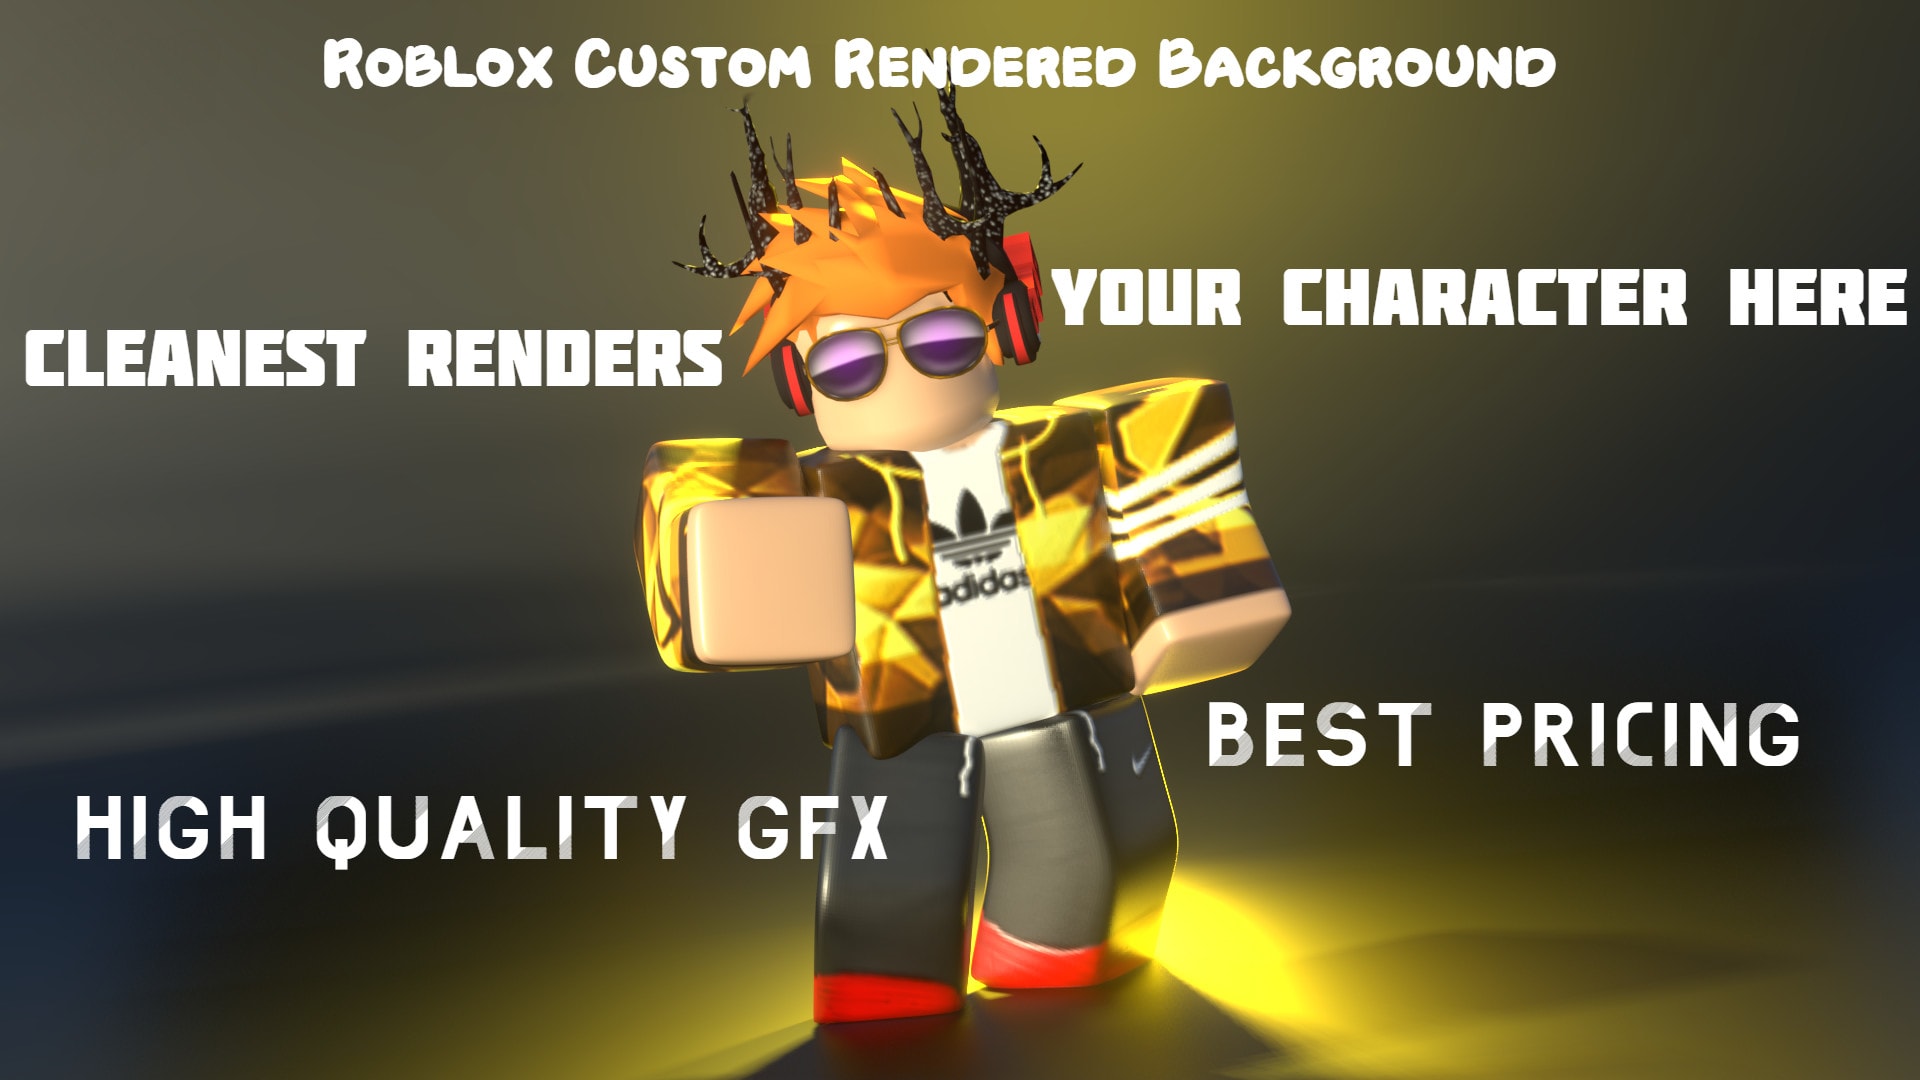 Create A Roblox Custom High Quality Rendered Background By Drakend - personalized gfx service roblox forum